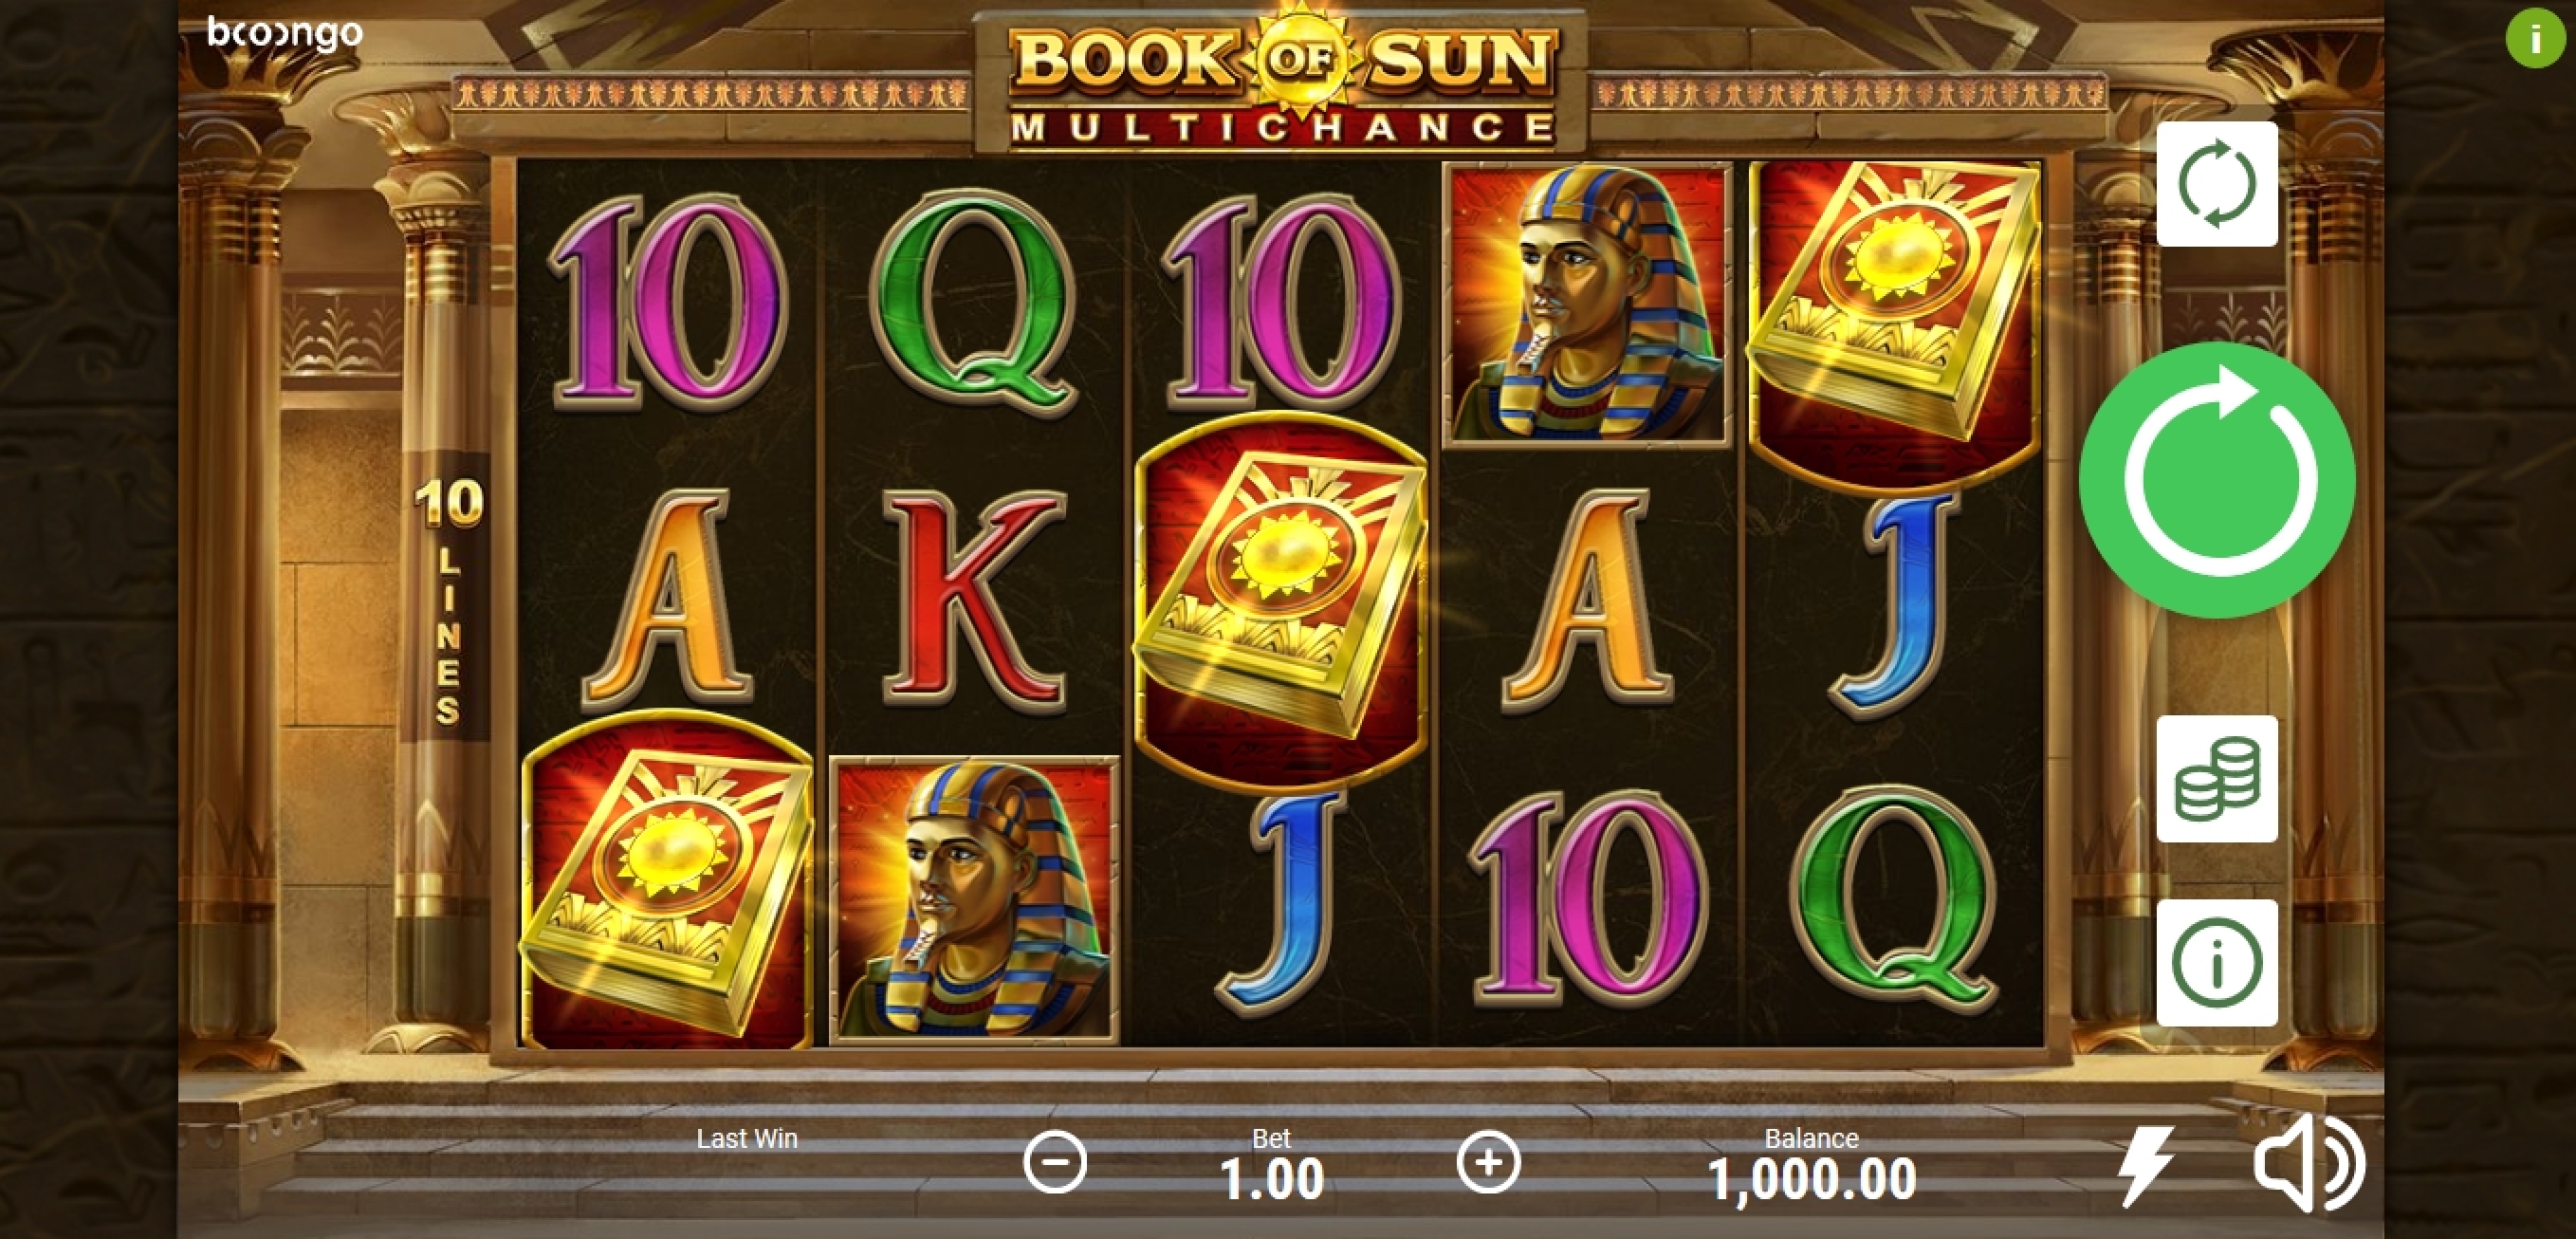 Reels in Book of Sun: Multi Chance Slot Game by Booongo Gaming